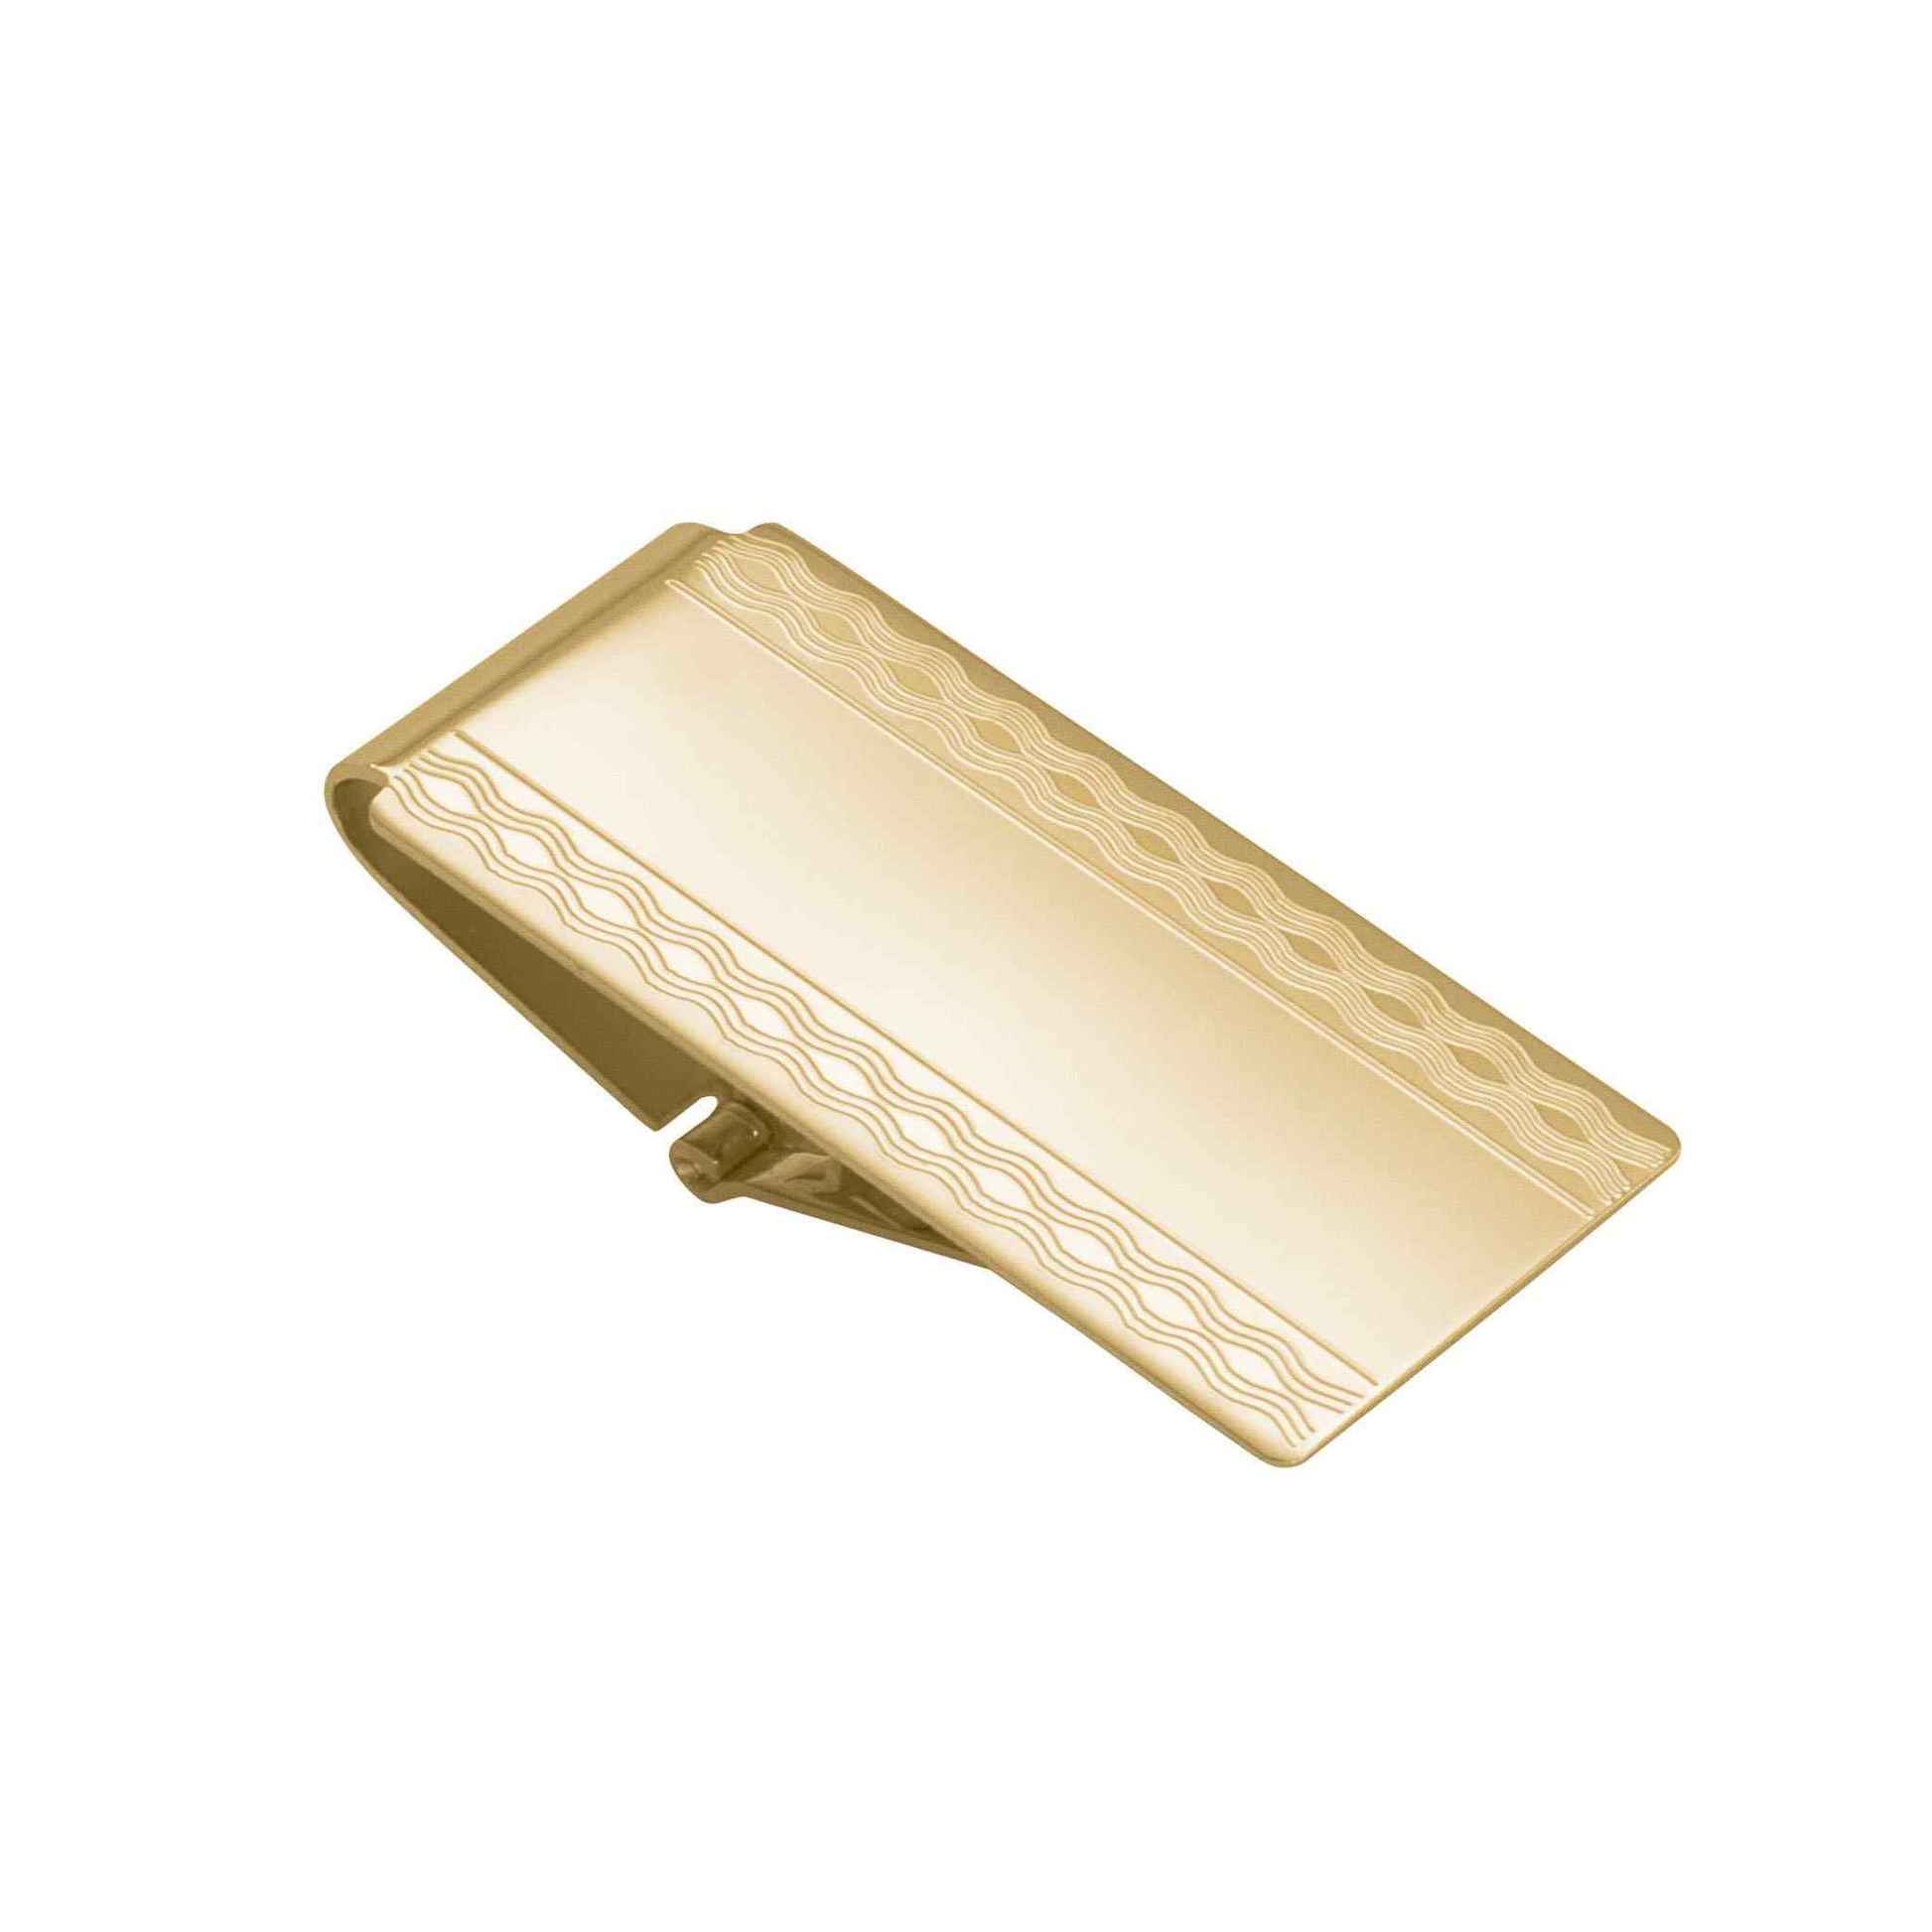 A hinged money clip displayed on a neutral white background.